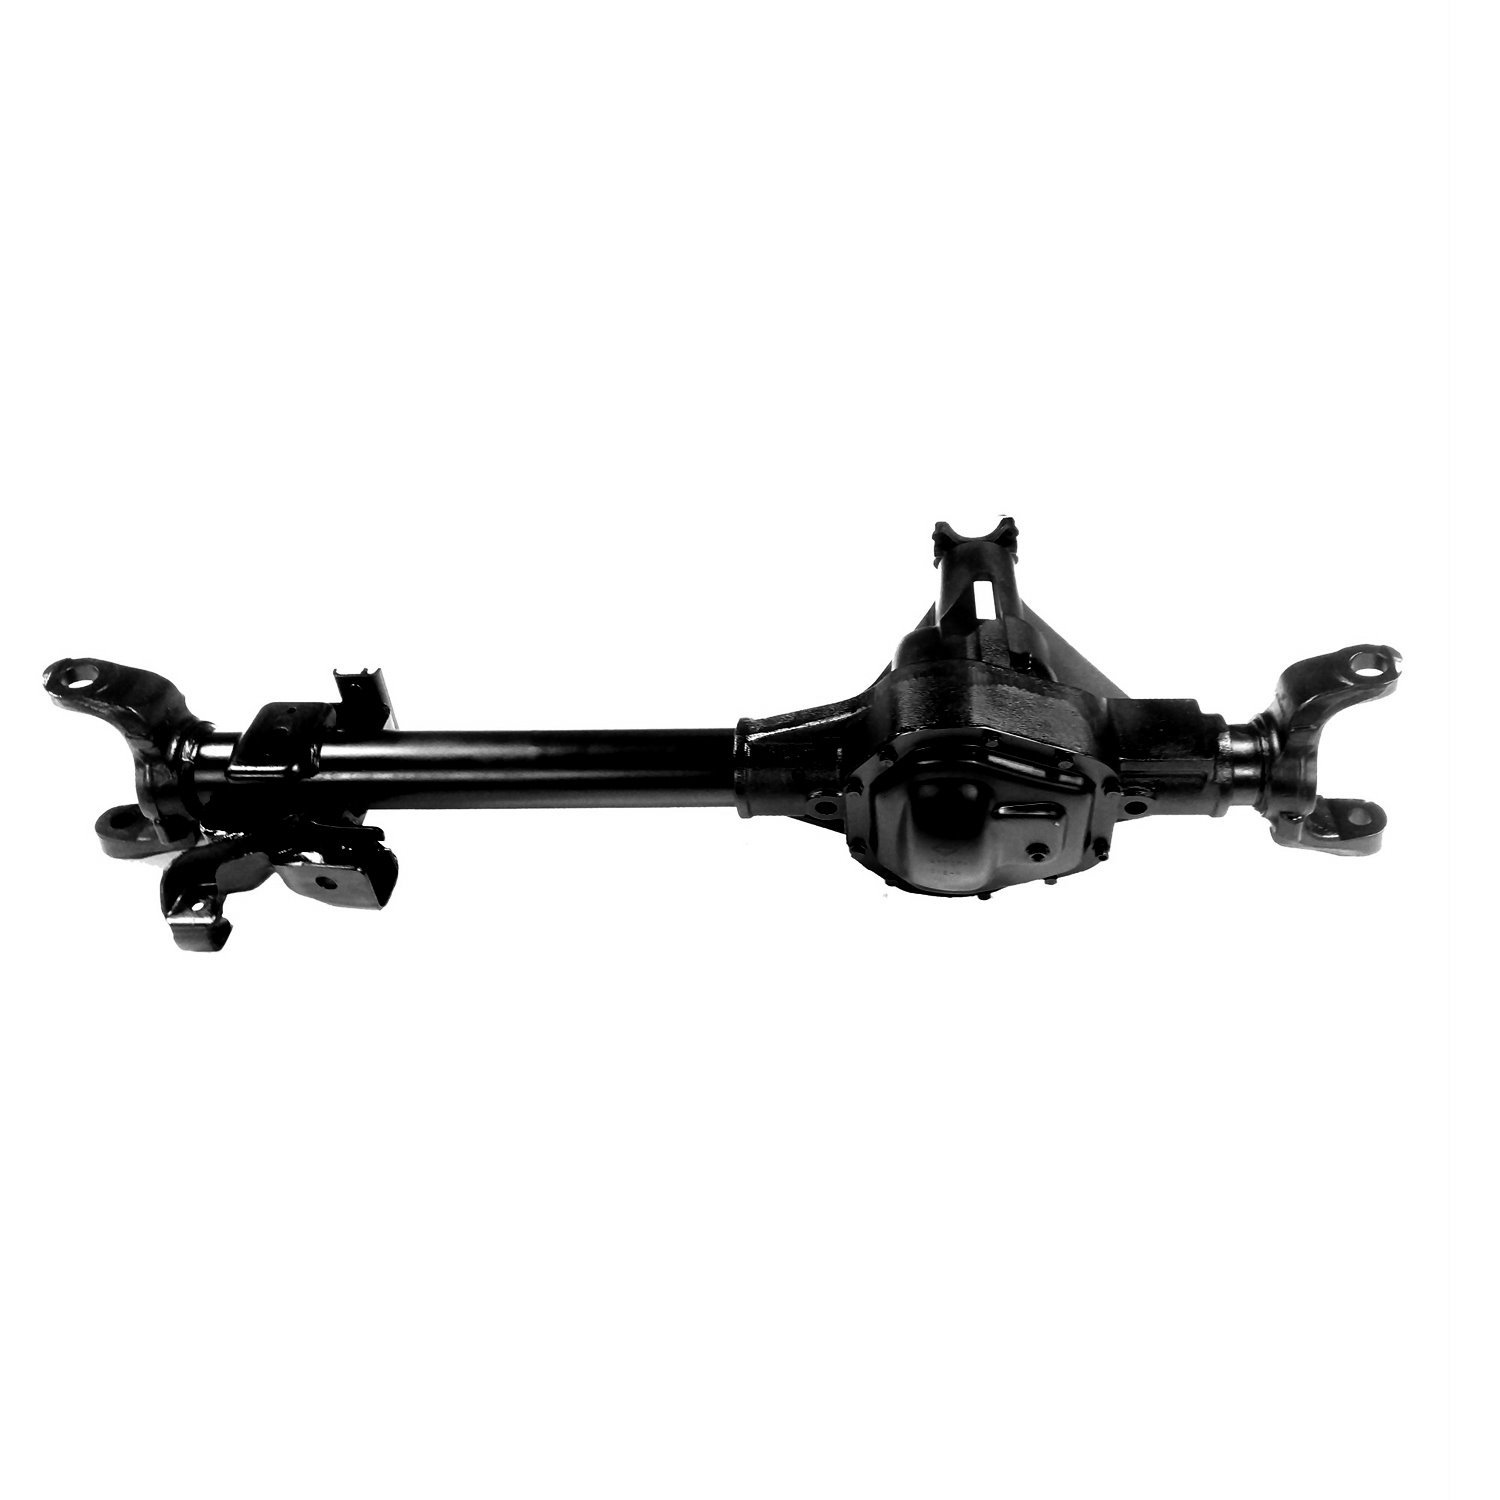 Remanufactured Complete Axle Assembly for Dana 60 08-09 Ford F350 4.30, SRW